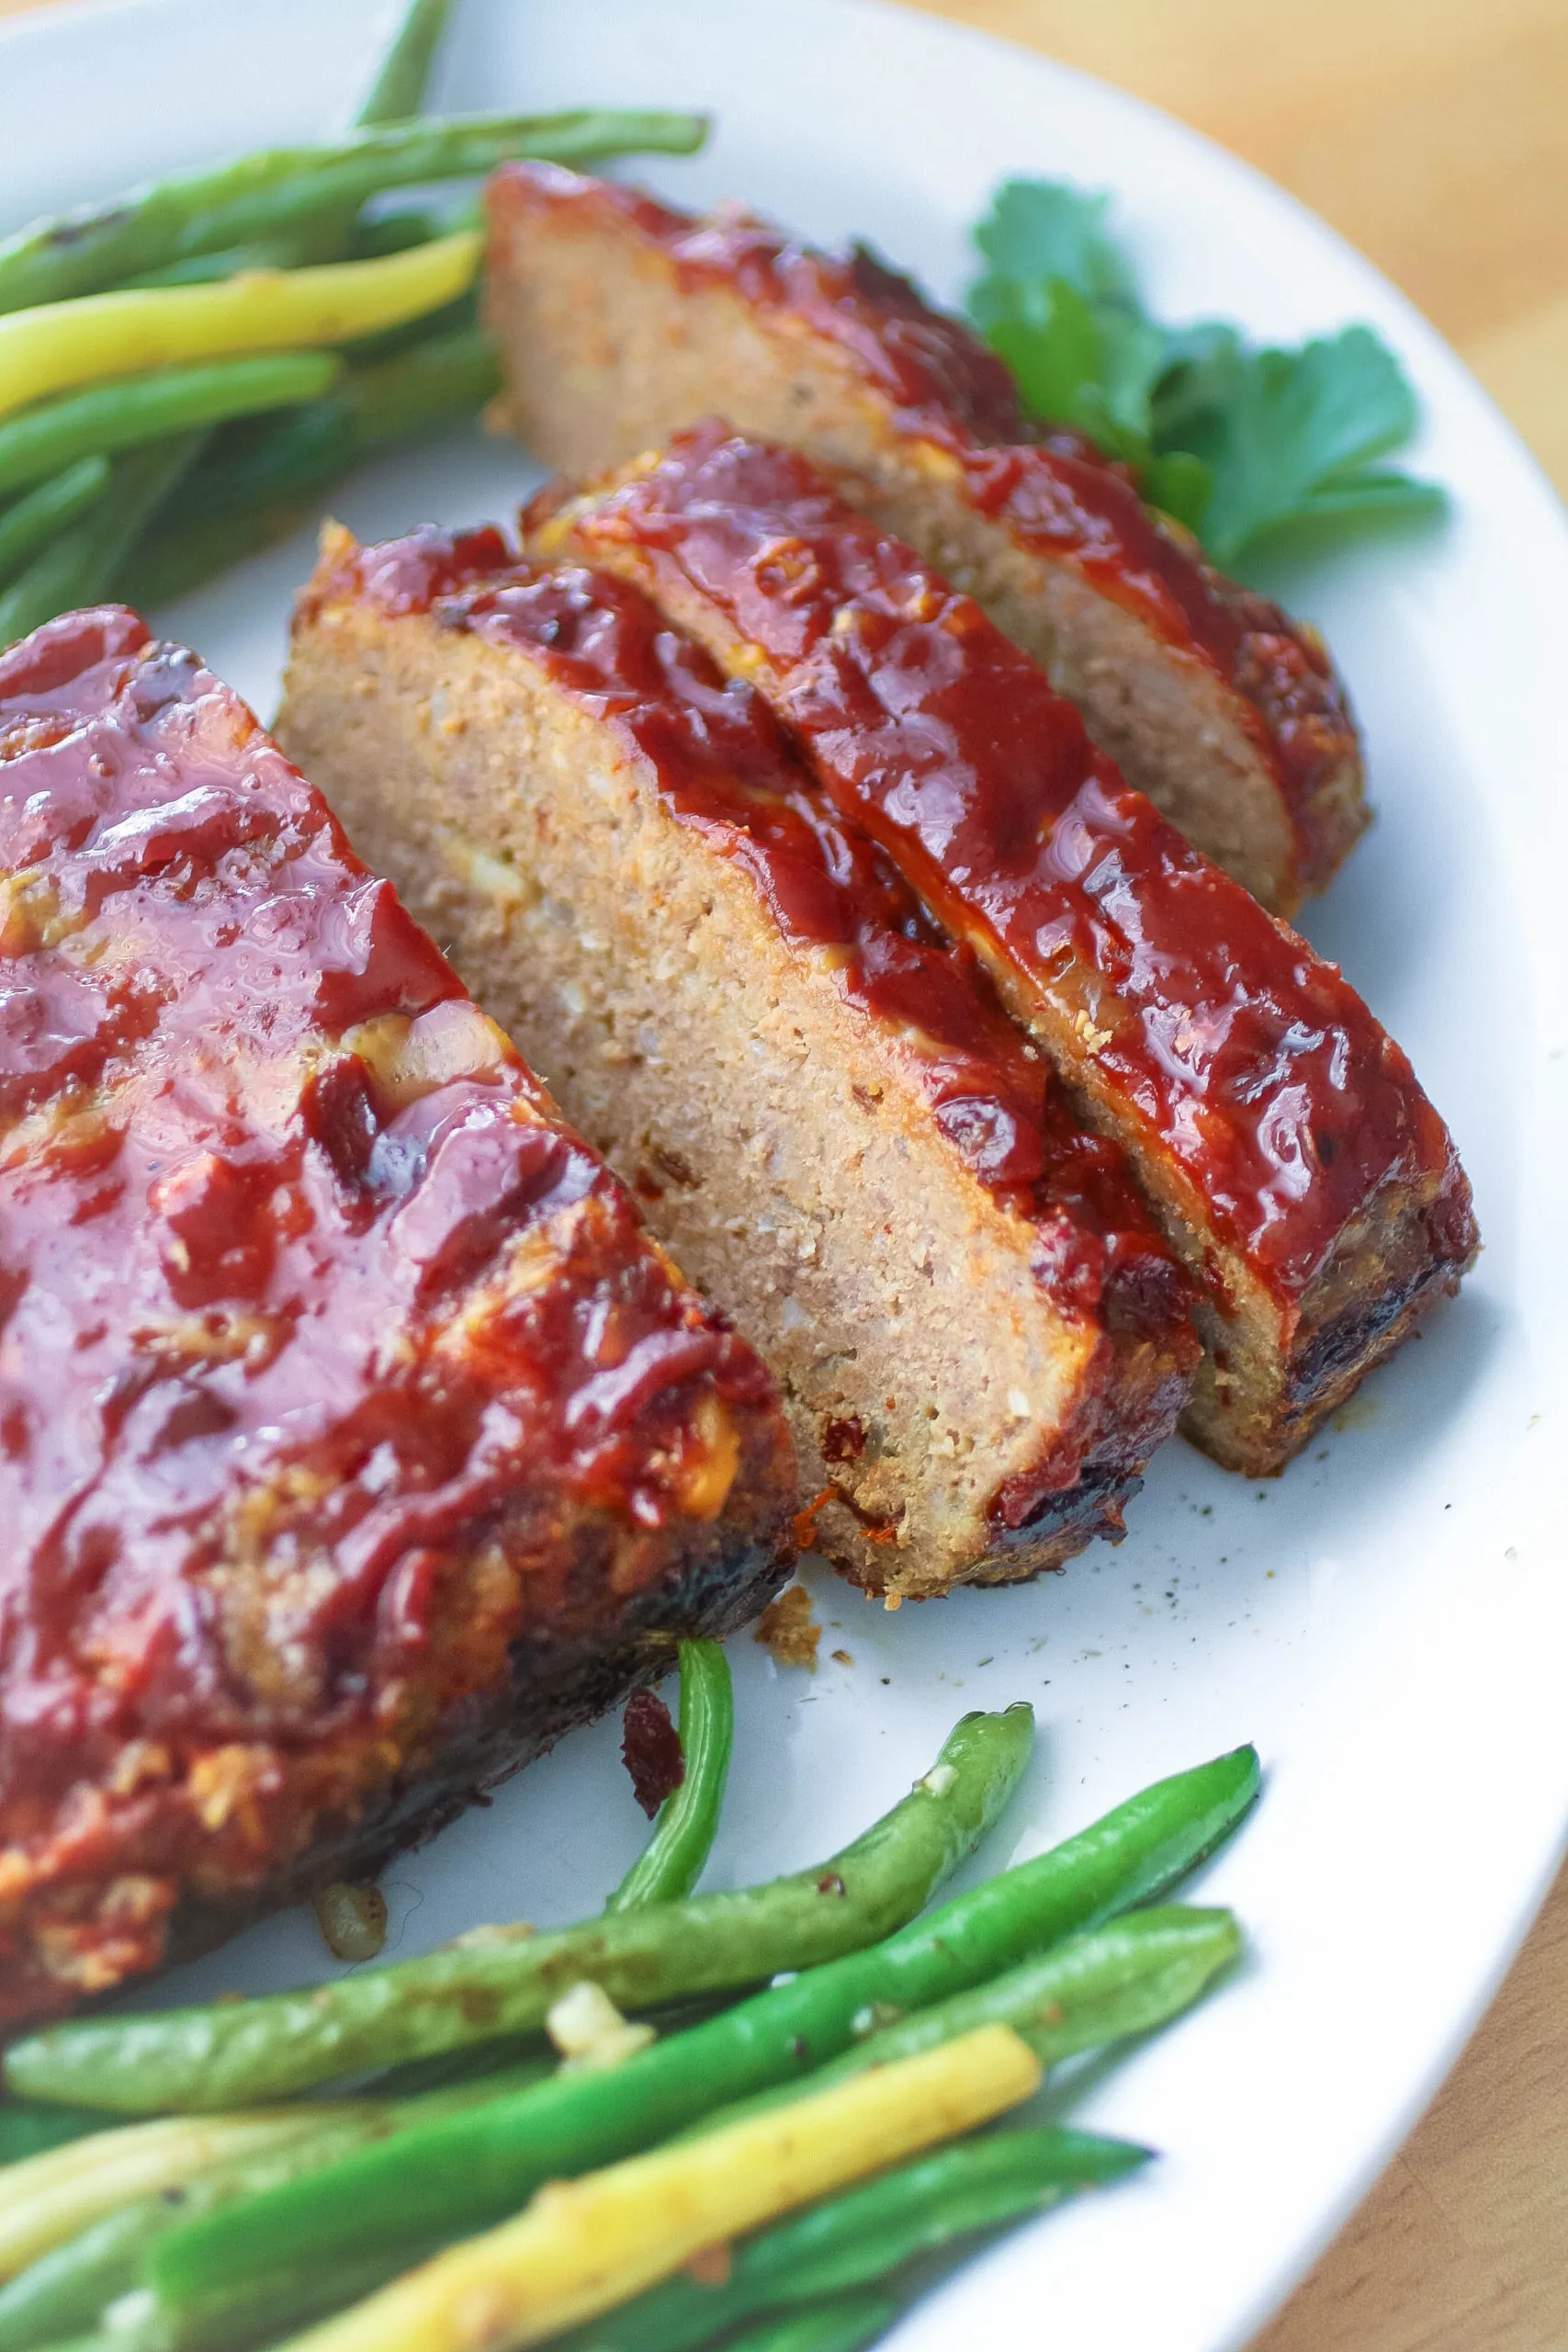 You'll love Spicy Chipotle Meatloaf as part of a hearty meal.